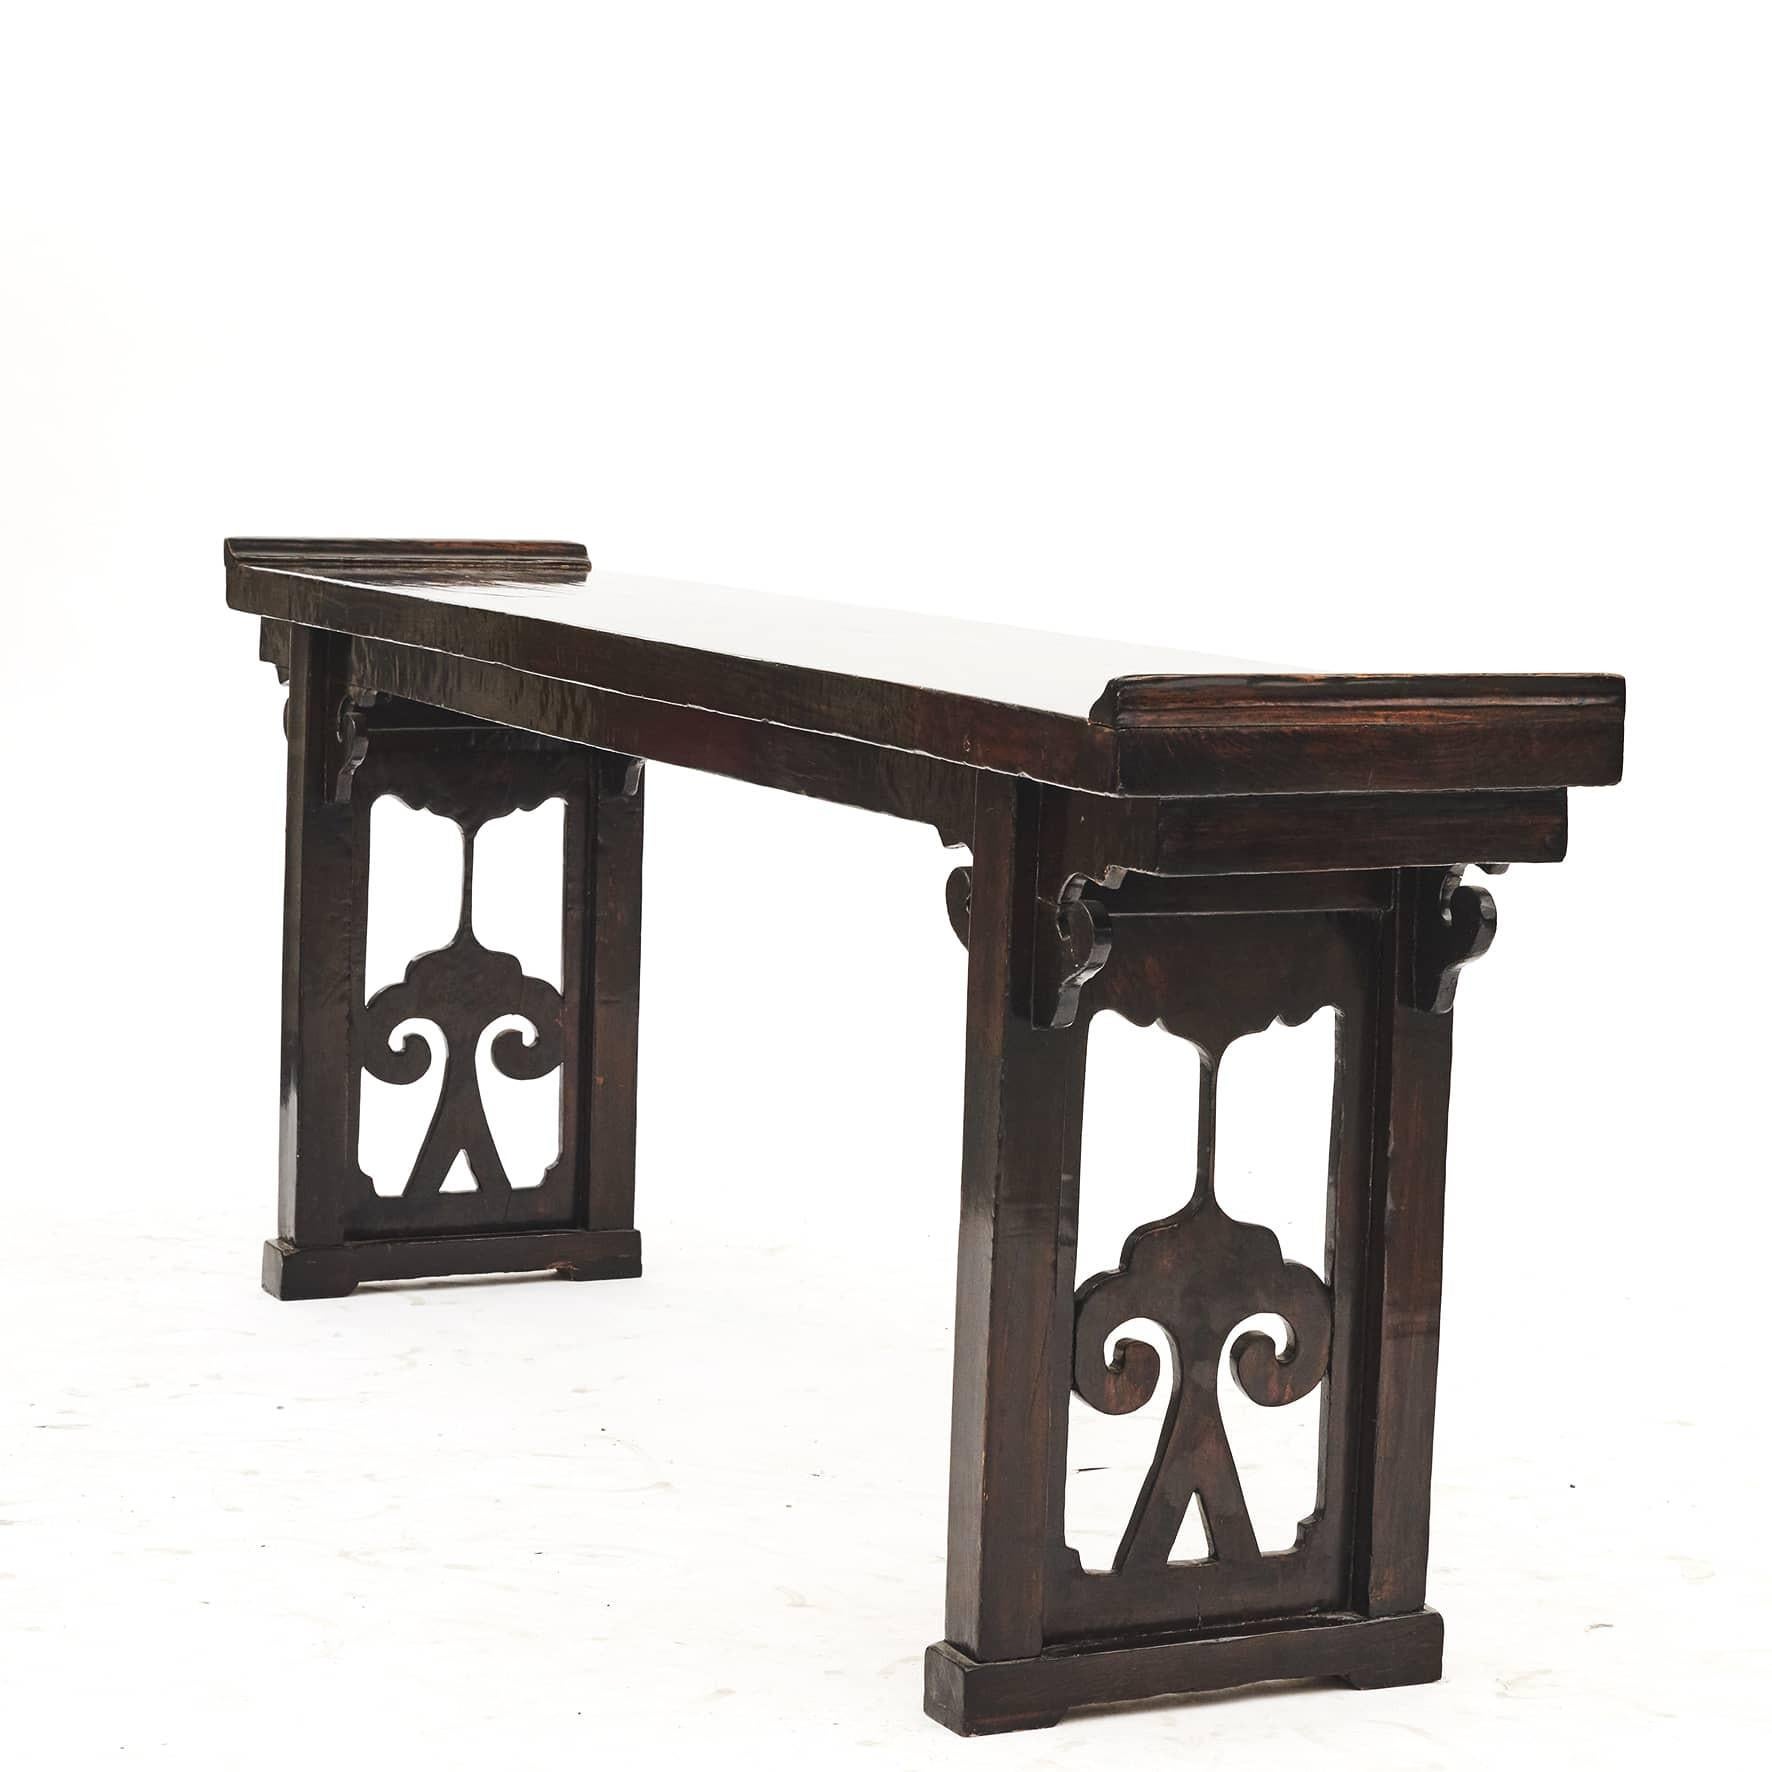 Chinese 19th Century Qing dynasty style altar console table.
Elm wood with remnants of the black lacquer.
The top is carved from a single solid plank. Side panels on the two 